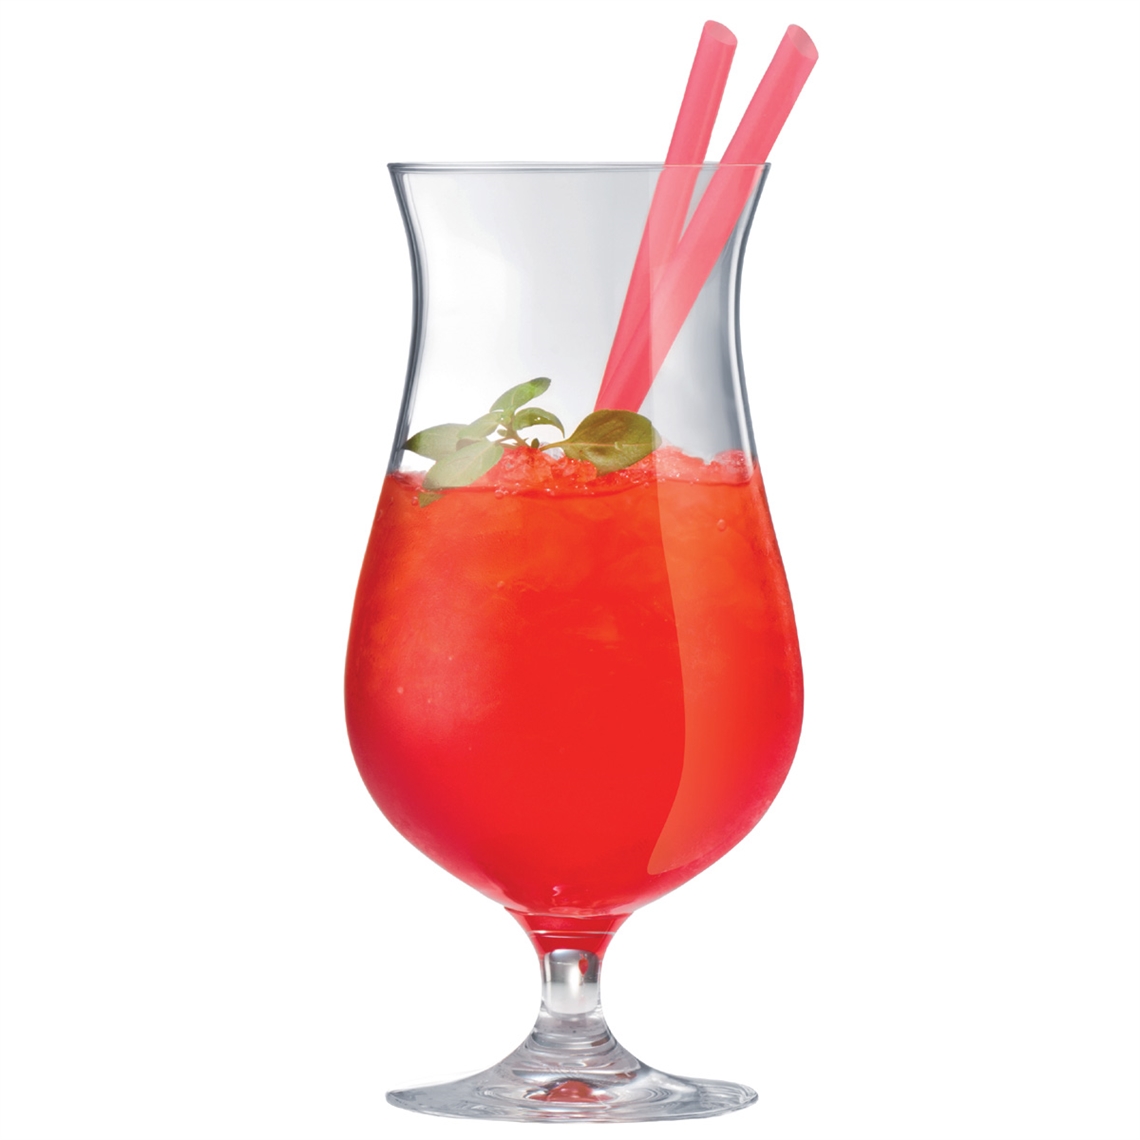 View more fortissimo from our Cocktail Glasses range